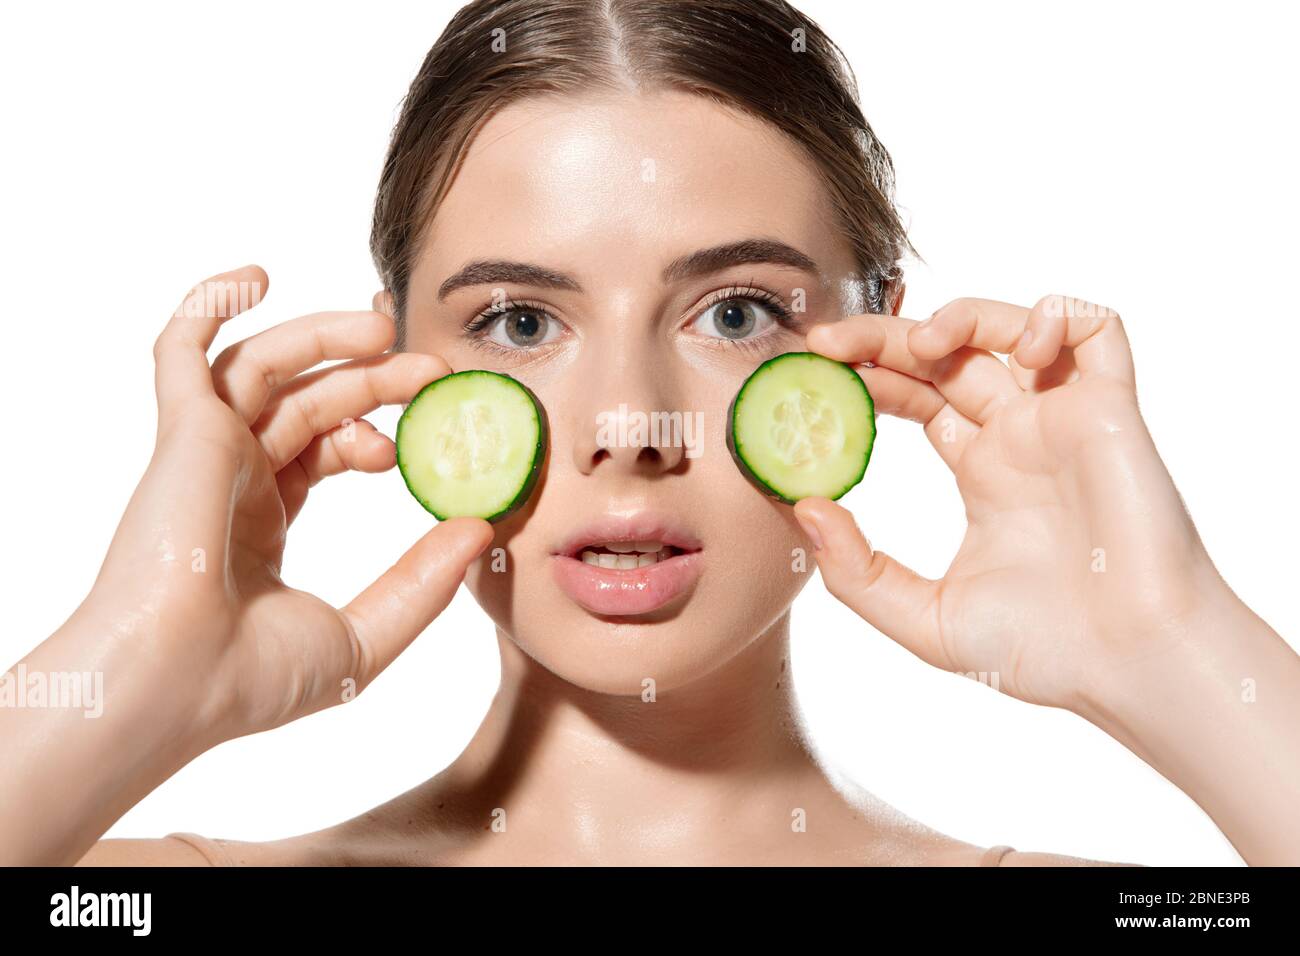 Portrait of beautiful young woman with fresh cucumber on face over white background. Concept of cosmetics, makeup, natural and eco treatment, skin care. Shiny and healthy skin, fashion, healthcare. Stock Photo